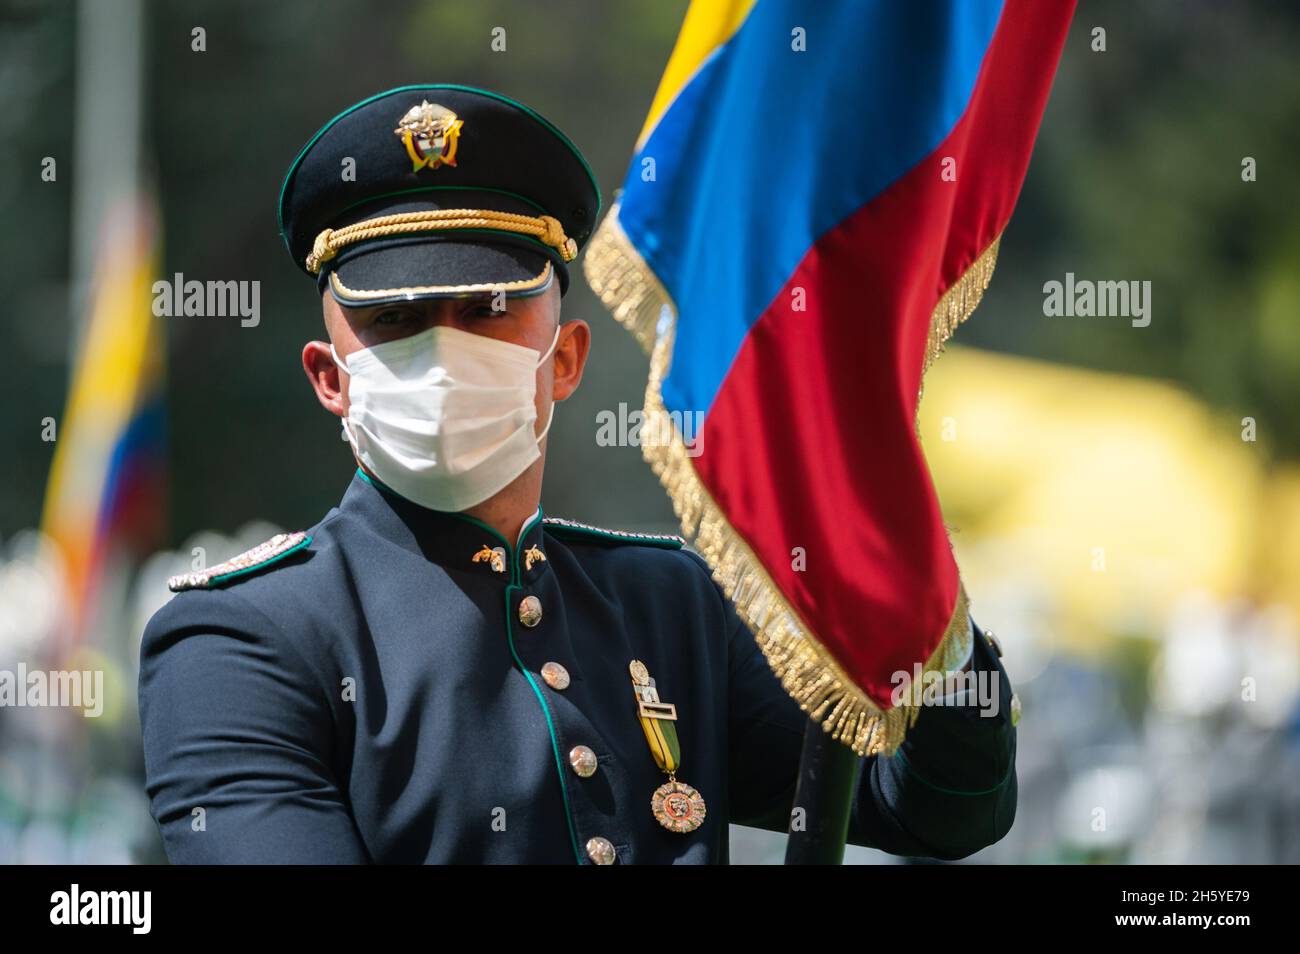 Bogota, Colombia. 11th Nov, 2021. Newly promoted Police officers participate in their promotion ceremony during an event were Colombia's president Ivan Duque Marquez and Colombia's Minister of Defense Diego Molano in conmmemoration of the 130 anniversary of Colombia's National Police and the promotion to officers to more than a 100 police members, in Bogota, Colombia on November 11, 2021. Credit: Long Visual Press/Alamy Live News Stock Photo